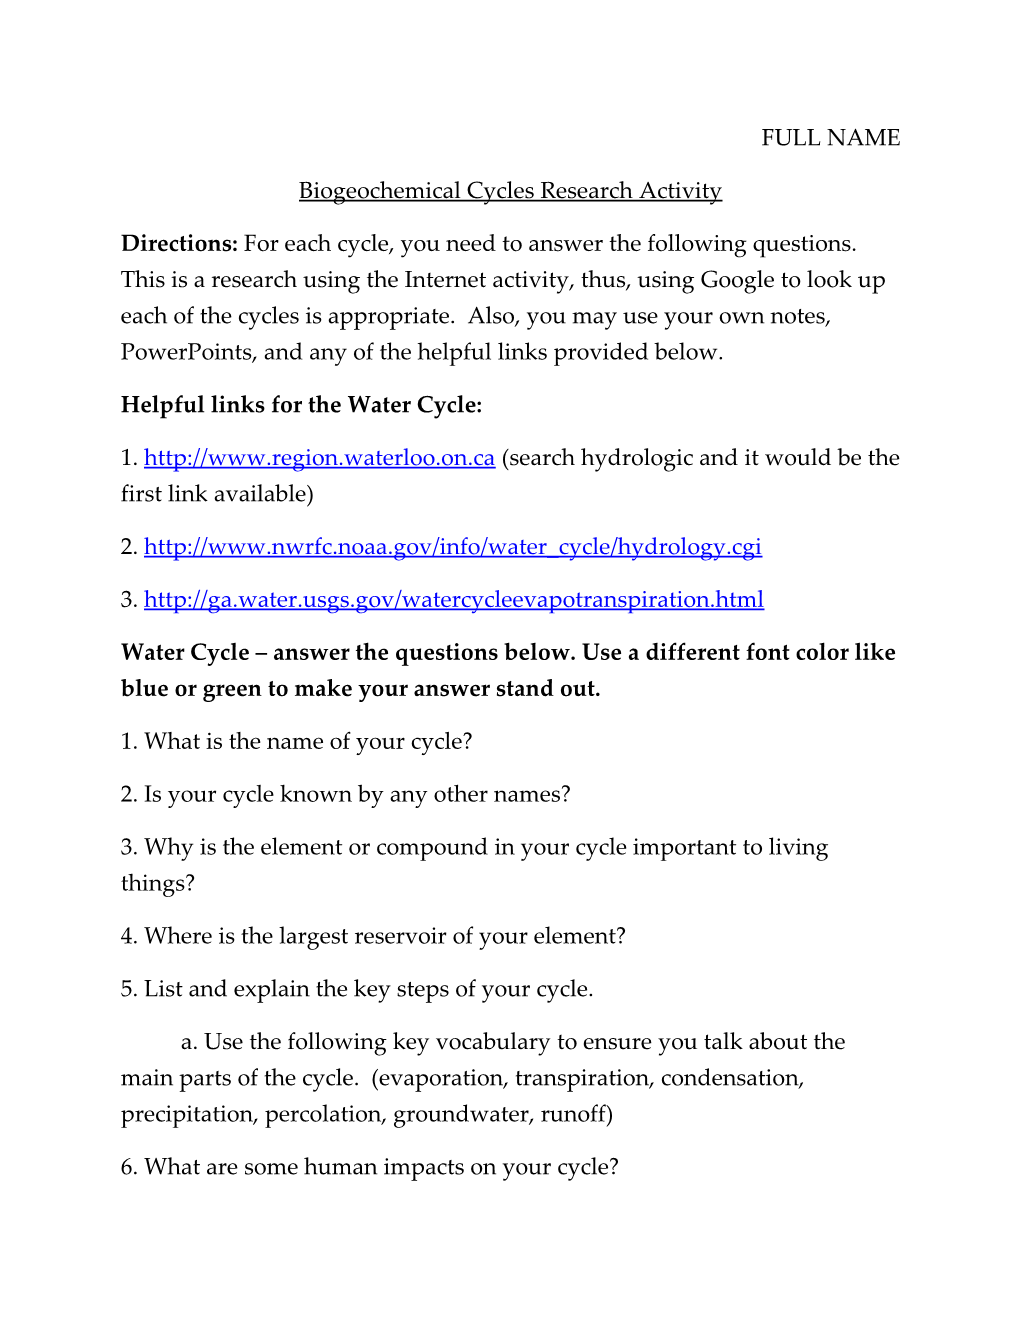 Biogeochemical Cycles Research Activity